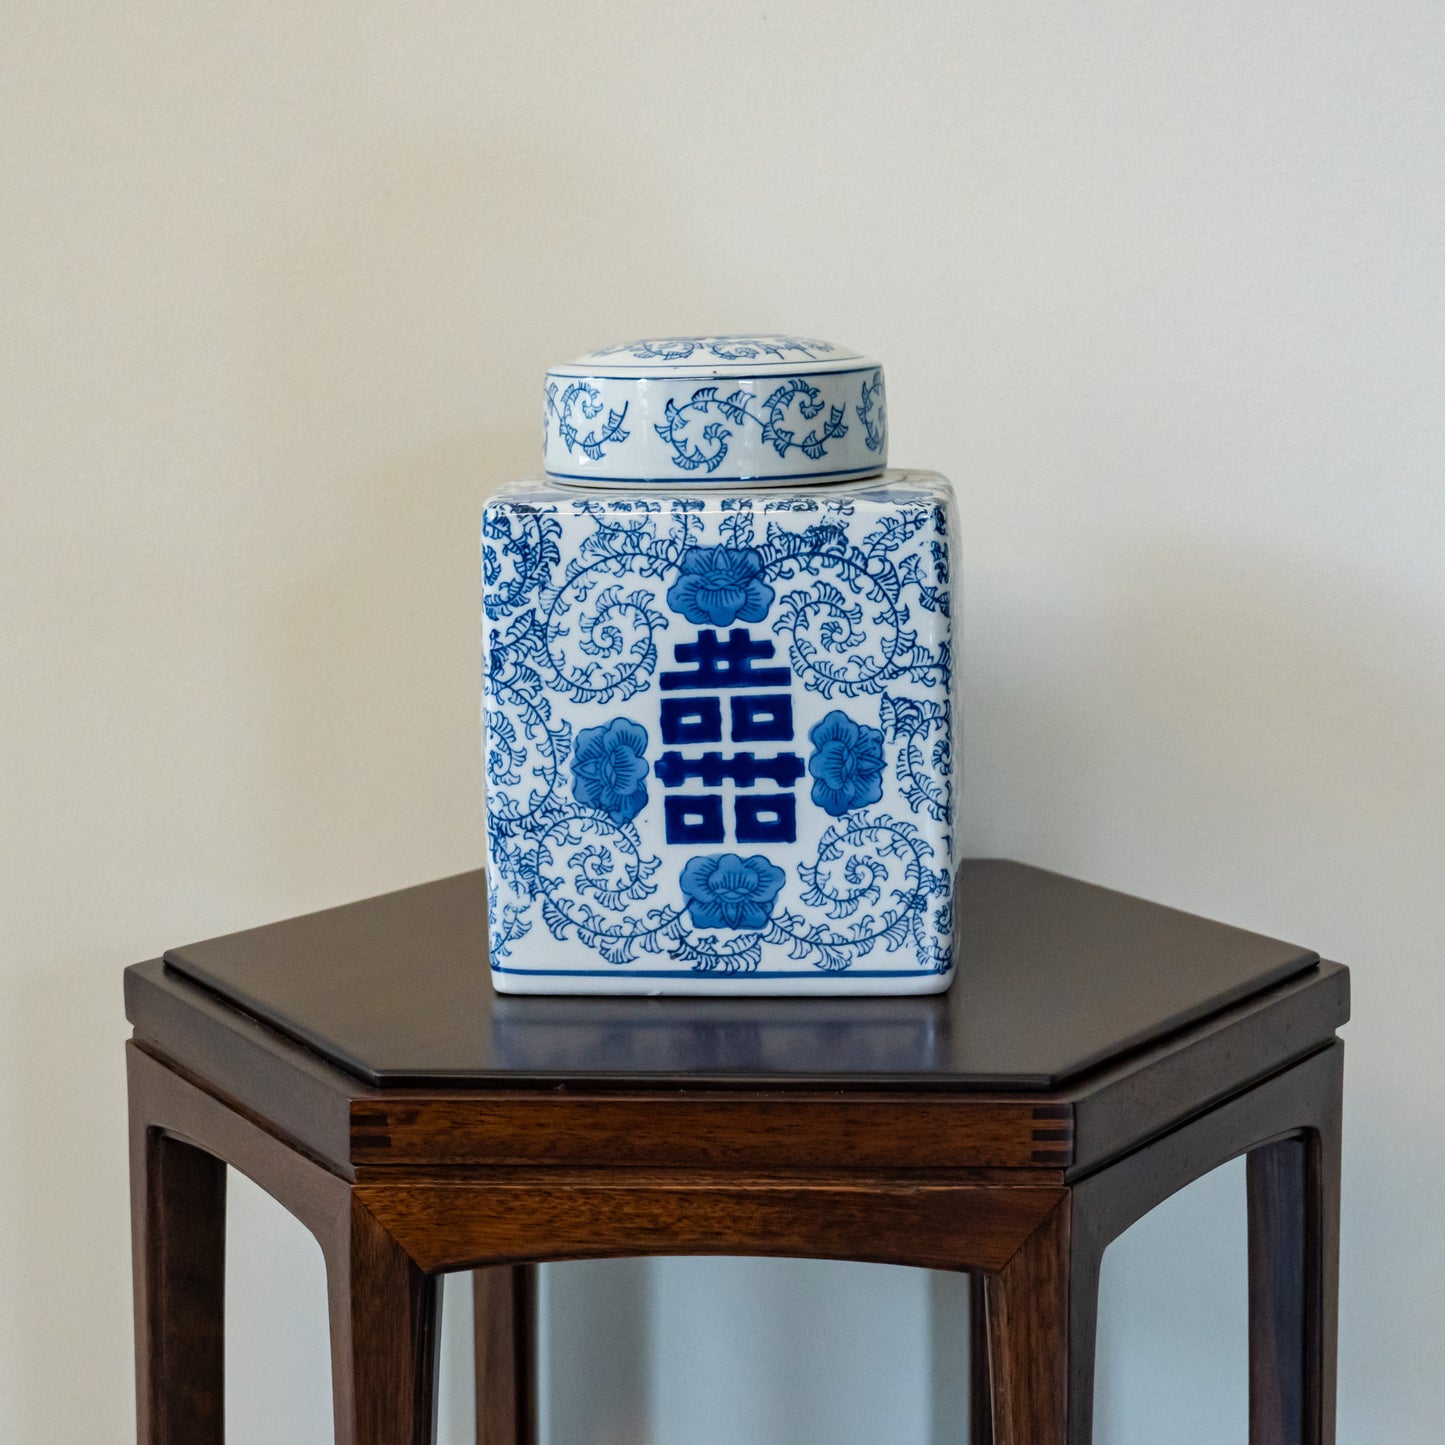 Traditional Blue & White Double Happiness Square Ginger Jar with lid, Candy Jar, snack jar, Porcelain Container for Home Decor